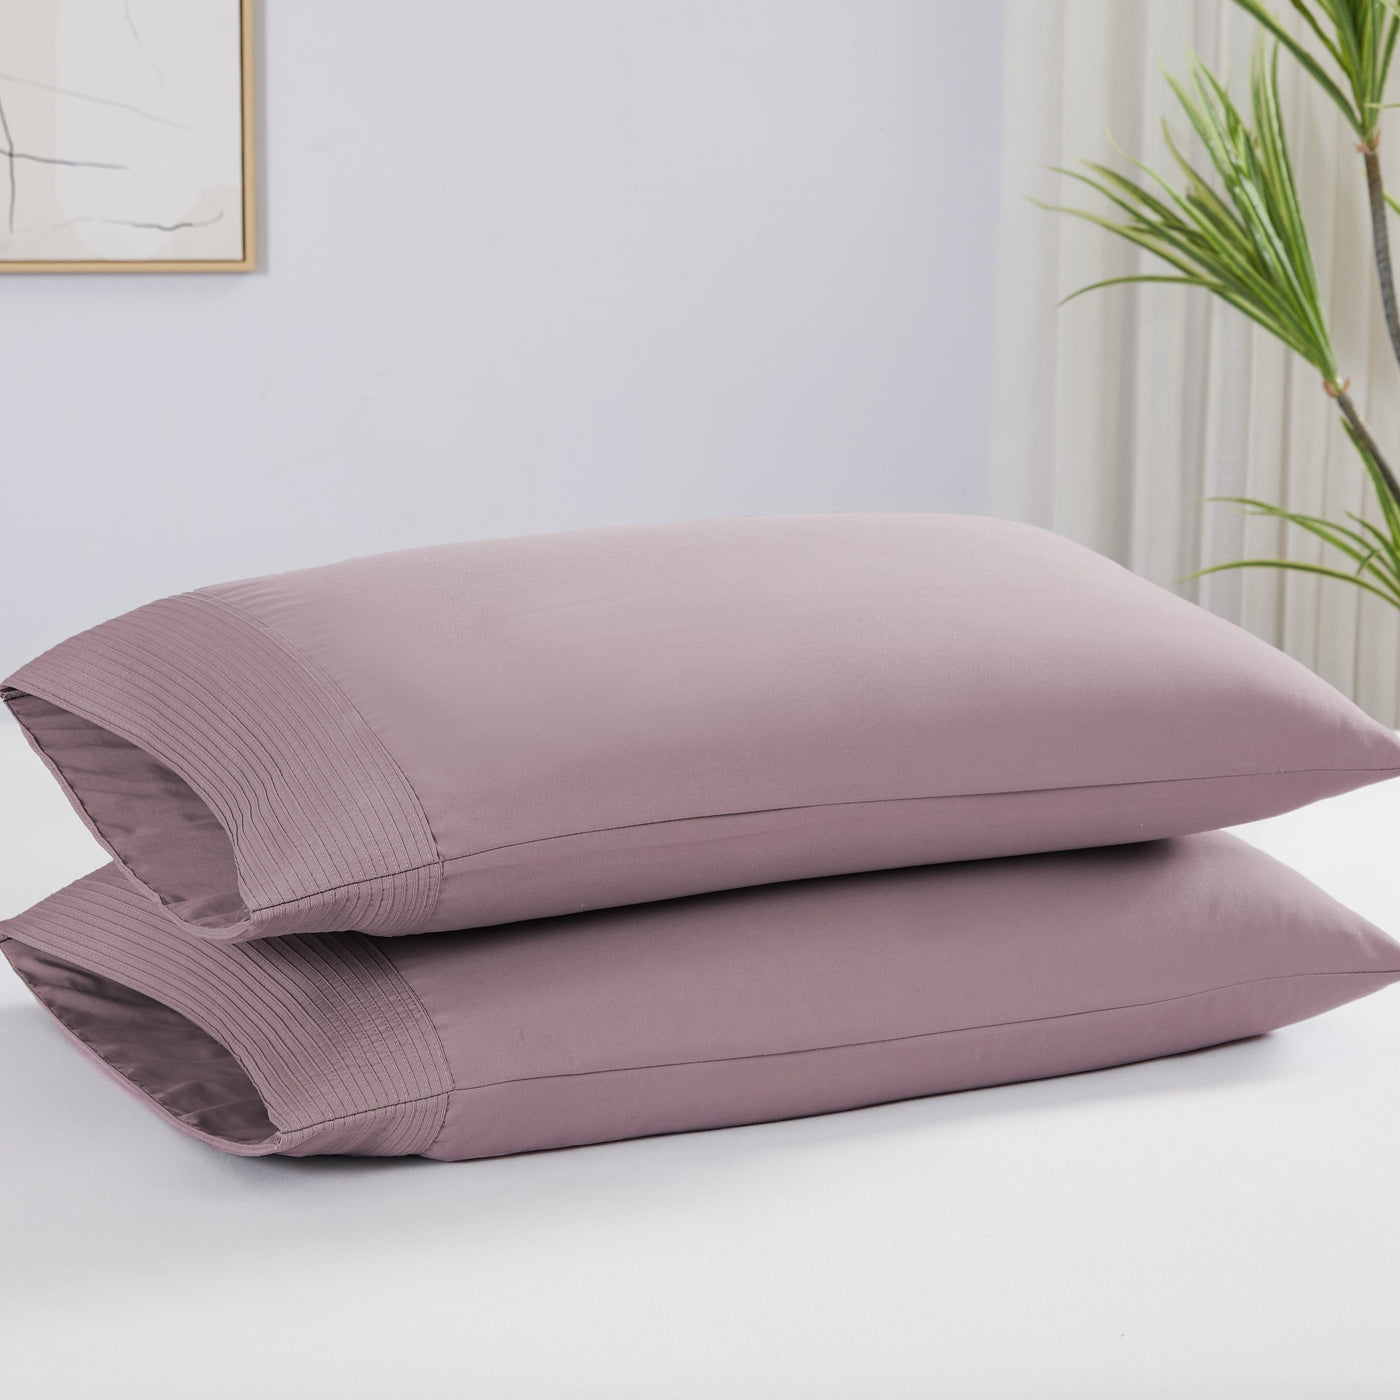 Two Vilano Pleated Pillow Cases in Lavender Stack Together#color_vilano-lavender